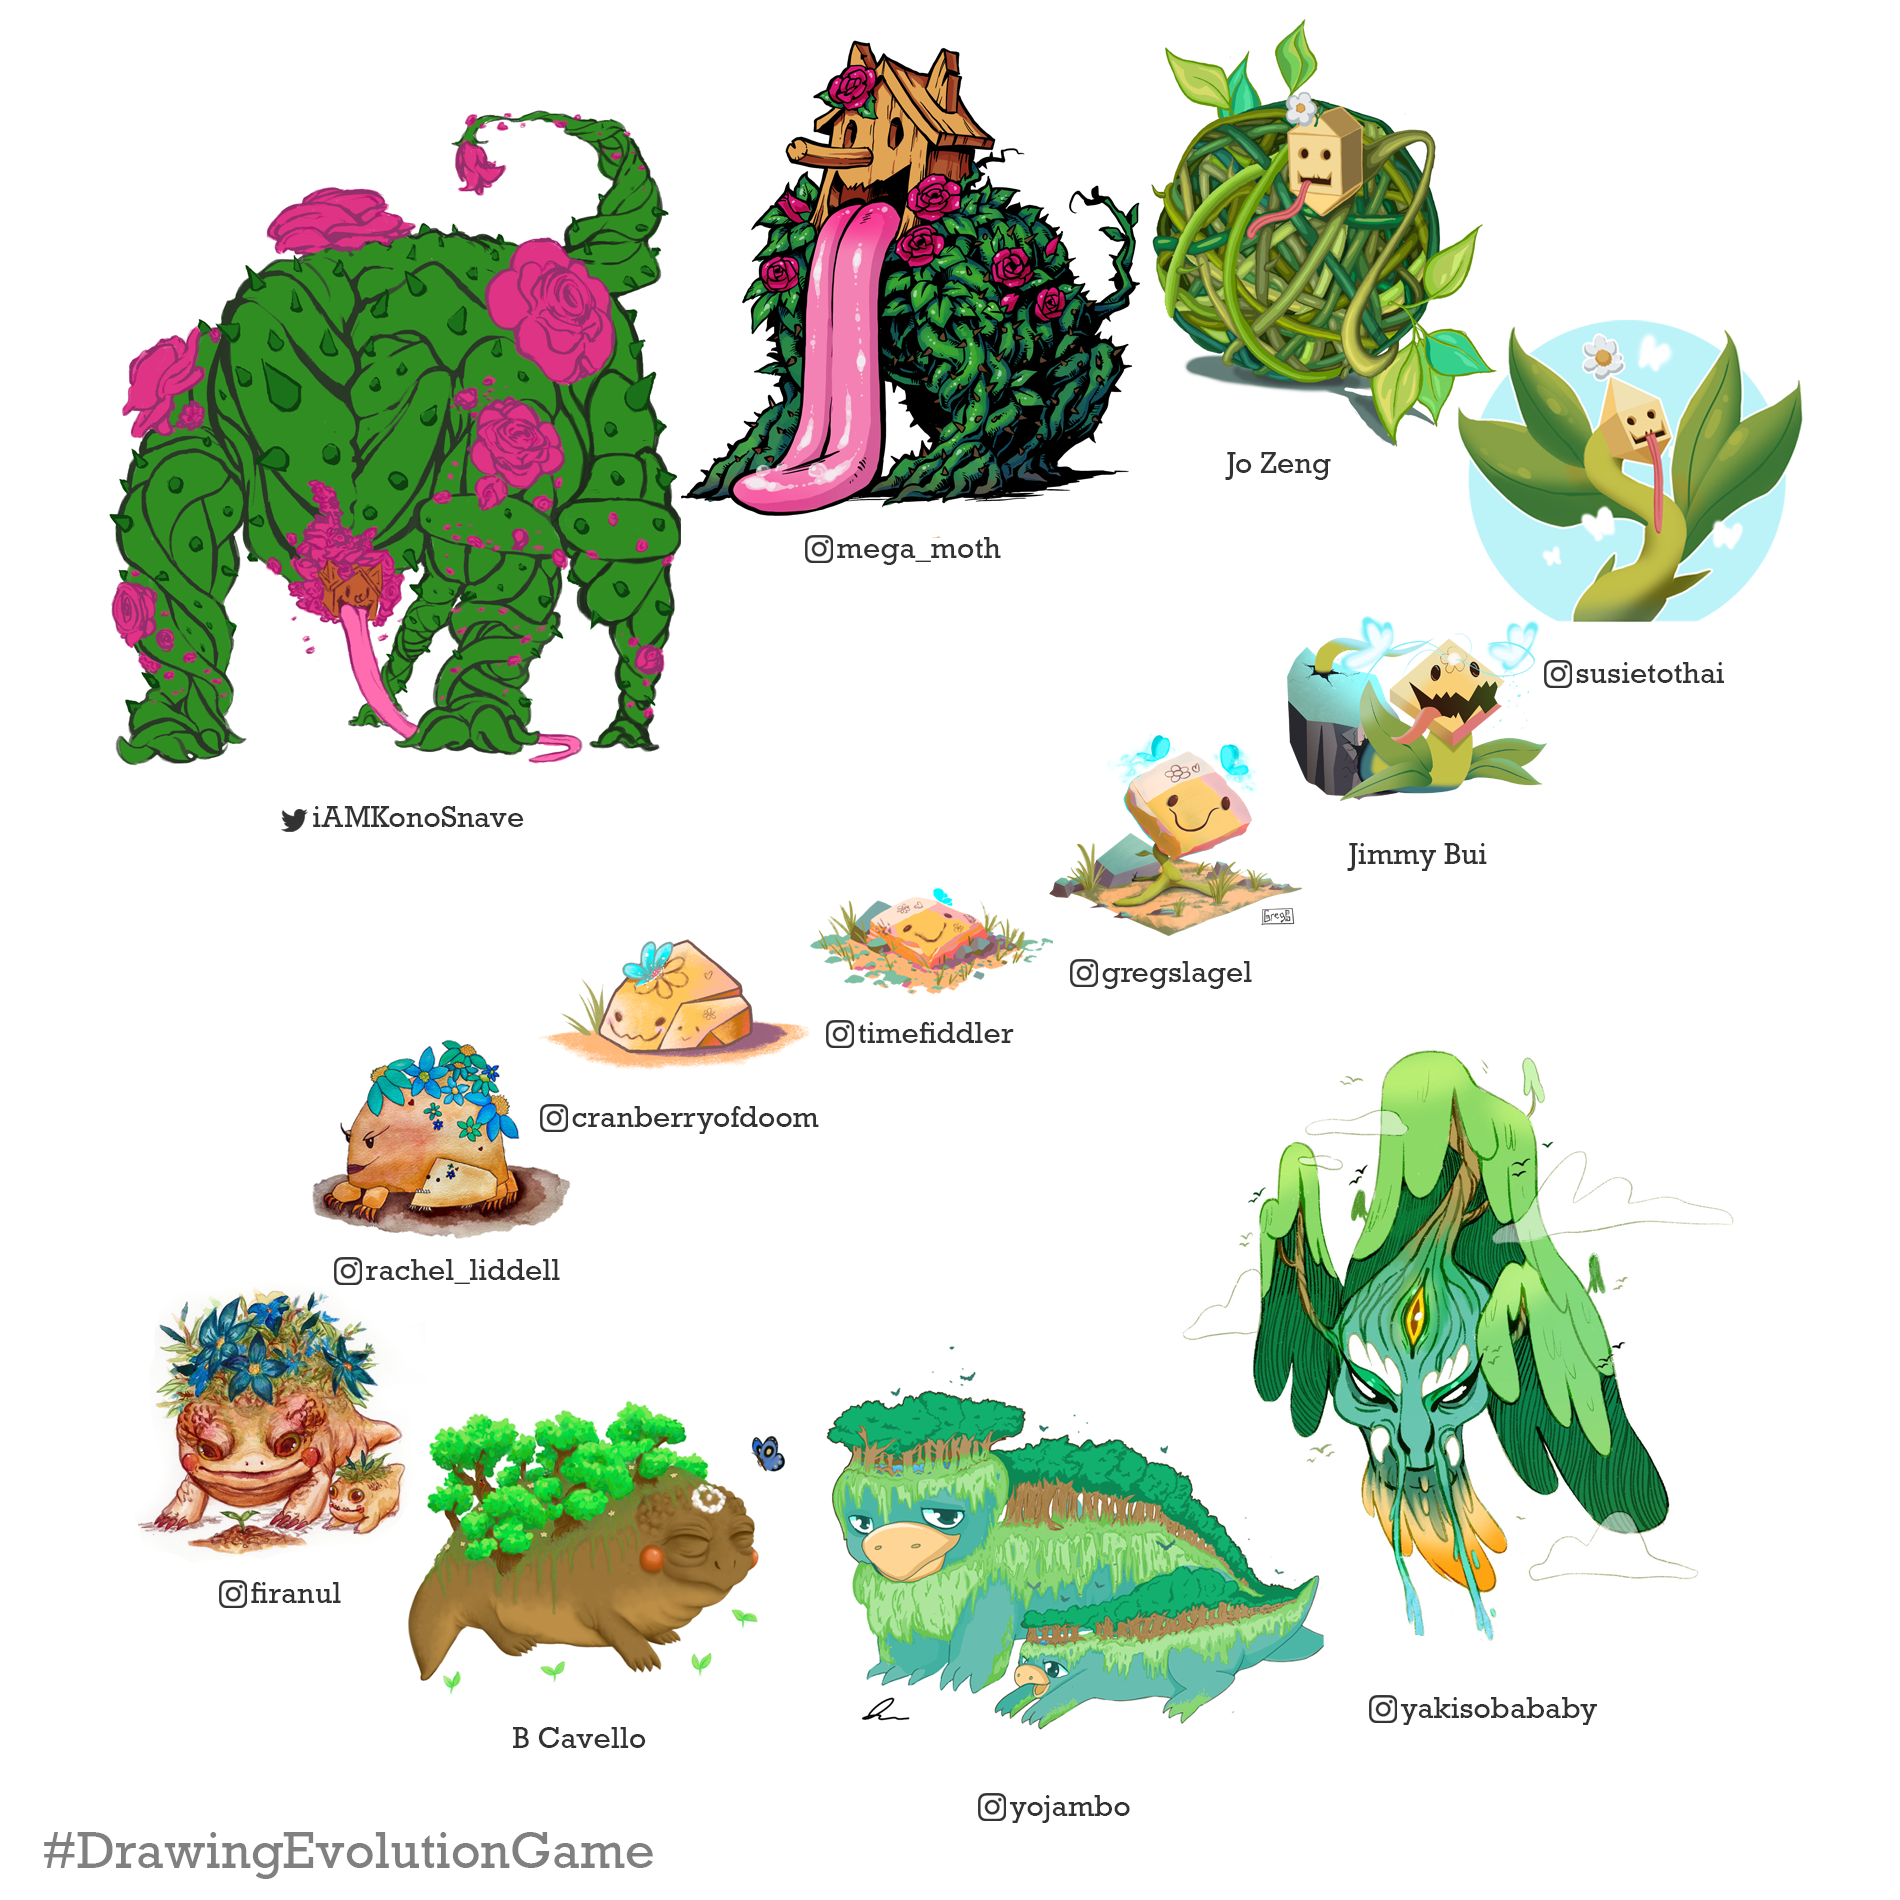 A compilation of evolutions of the smiling stone character from both branches arranged in a seamless swirl from the final form at the end of one branch (cactus-beast), through the starter seed, and then on to the other final form (ancient floating island)